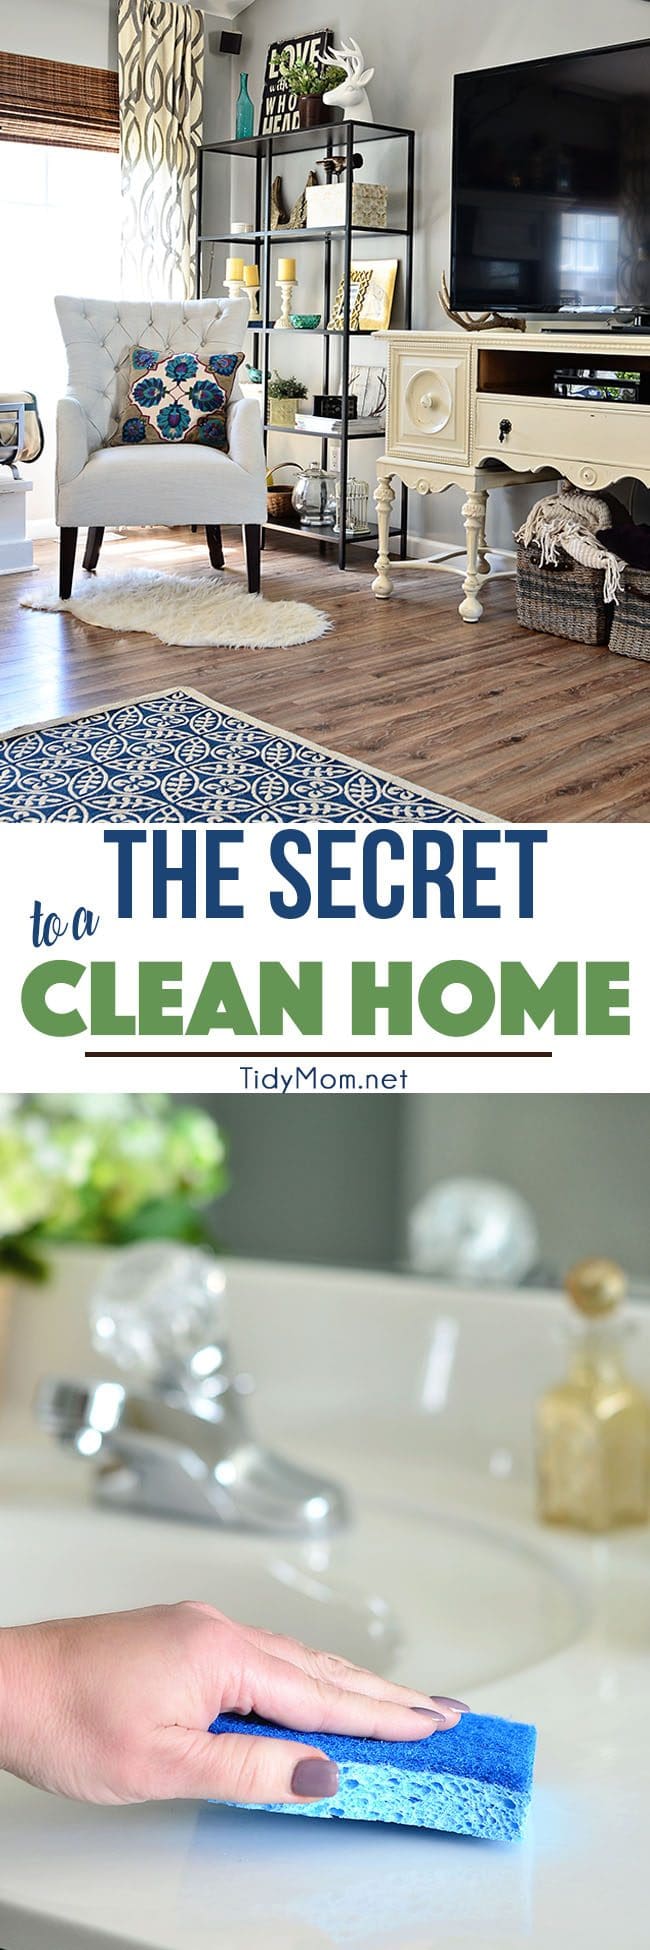 The key to good a spring cleaning and living in a cleaner house actually starts with clearing the clutter in your home.  The more organized your home is, the easier it will be to keep clean. The Secret to a Clean Home at TidyMom.net